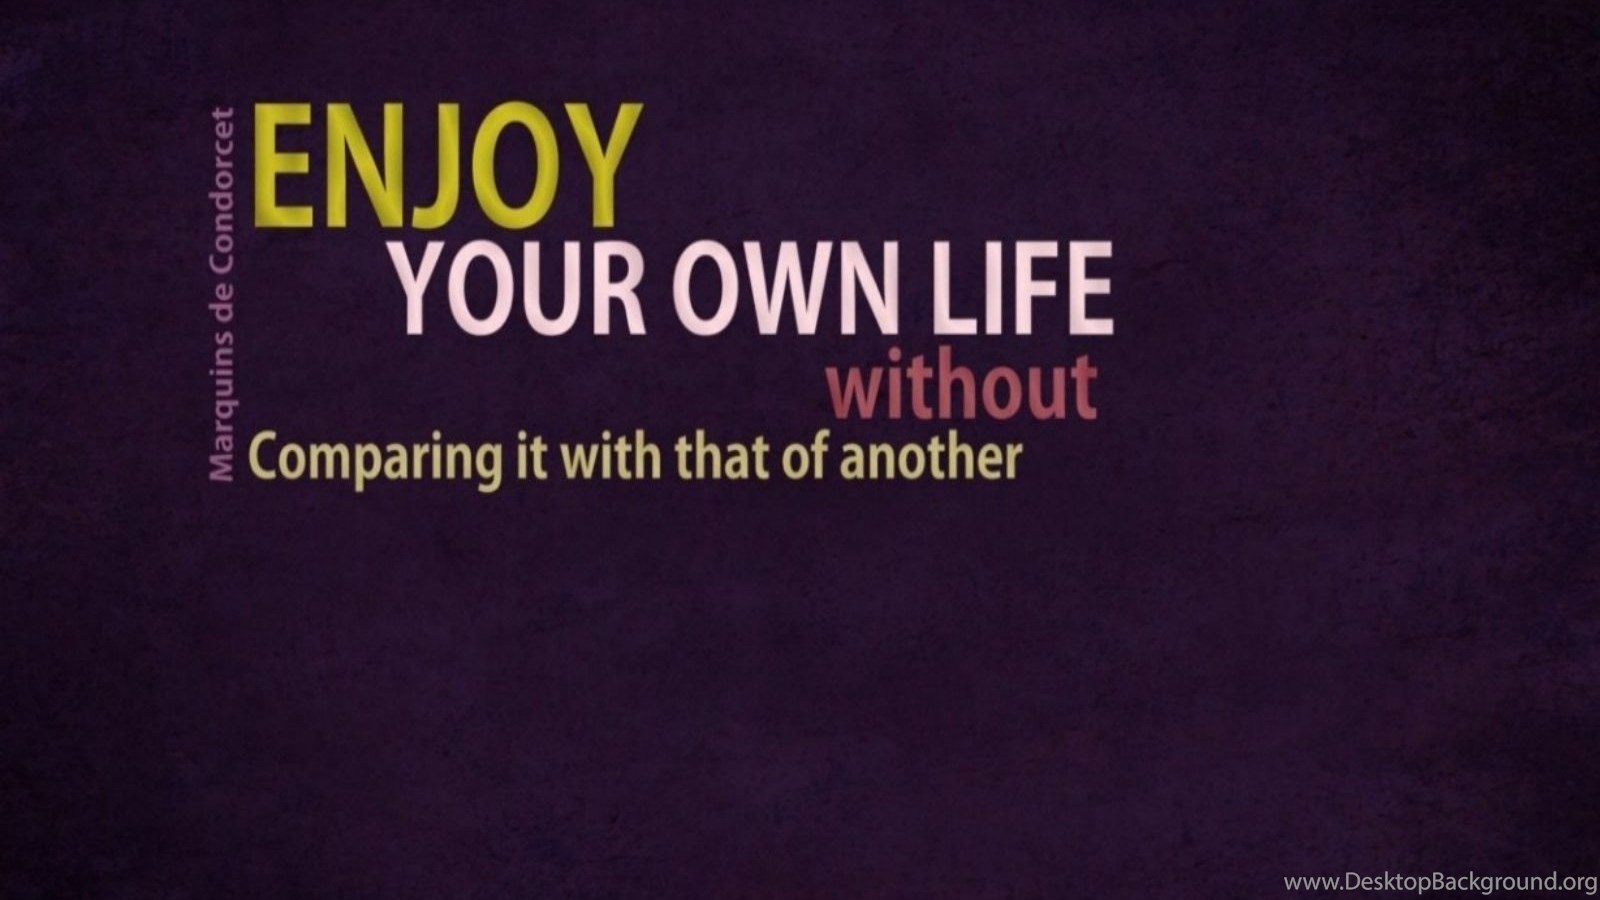 Enjoy your own Company. I own my life